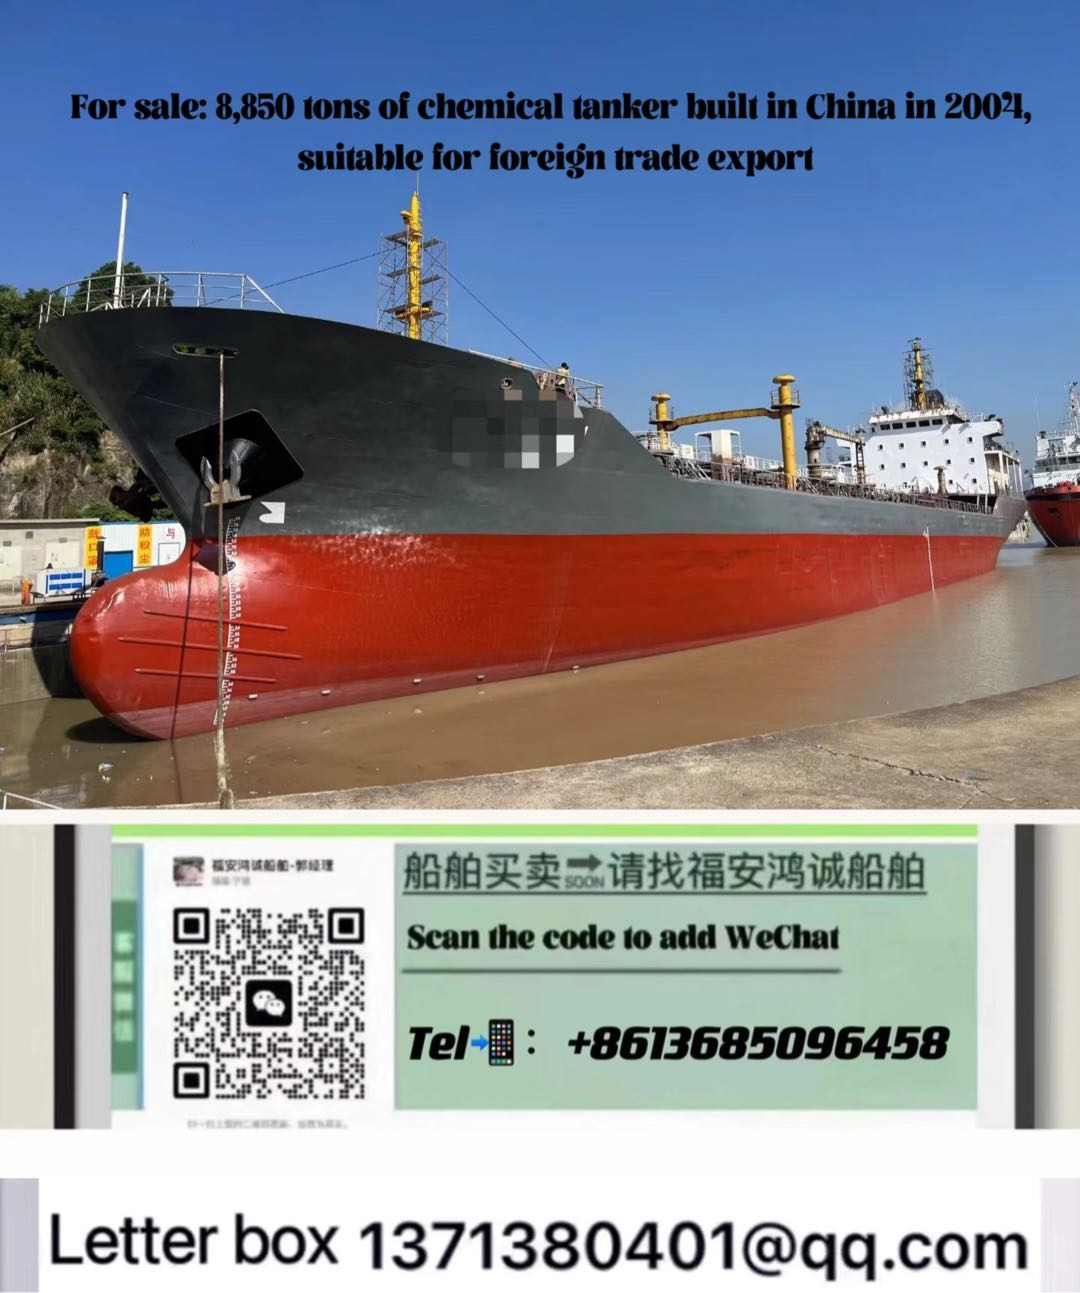 For sale: 8,850 tons of chemical tanker built in China in 2004, suitable for foreign trade export